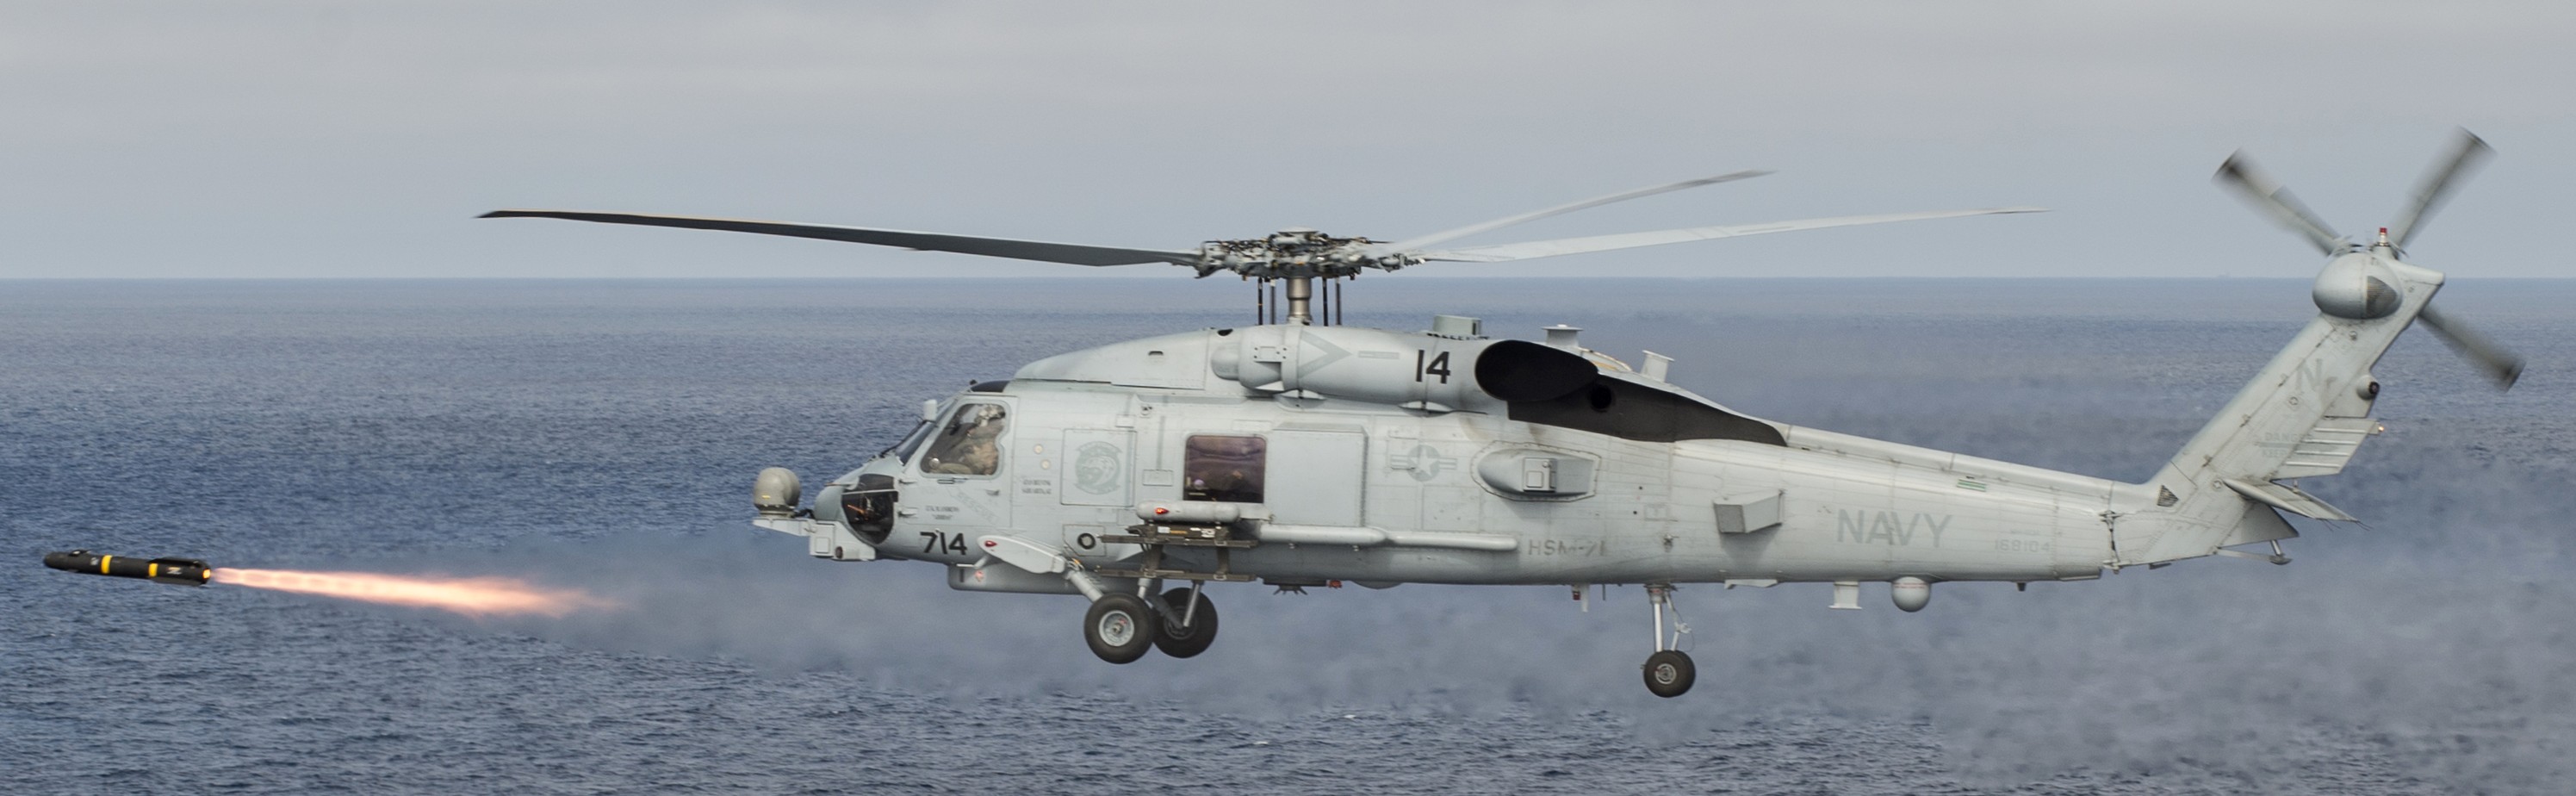 hsm-71 raptors helicopter maritime strike squadron mh-60r seahawk navy 2015 48 agm-114 hellfire missile